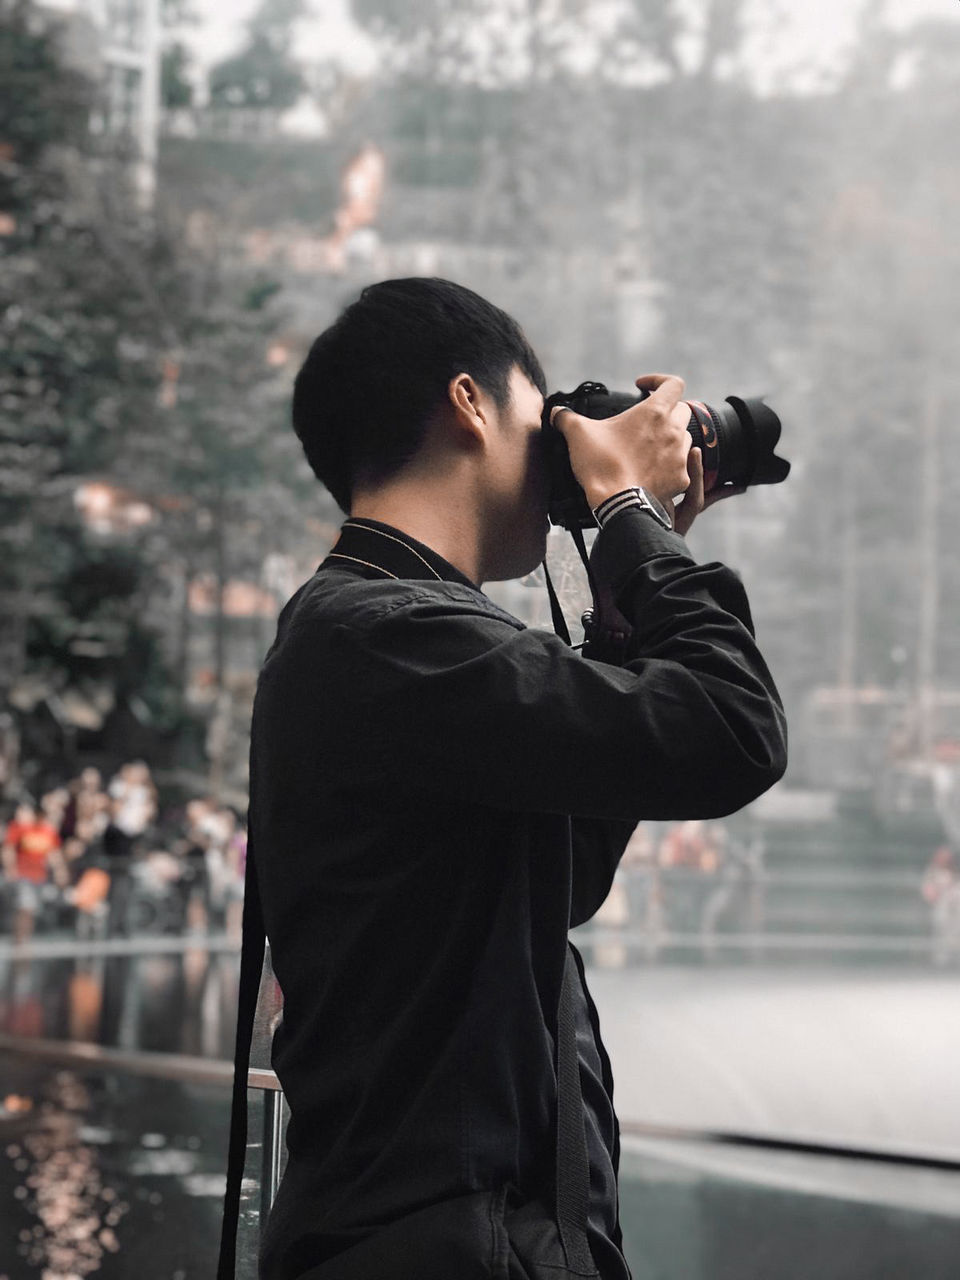 one person, photographing, photography themes, activity, real people, camera - photographic equipment, holding, focus on foreground, waist up, standing, technology, men, leisure activity, photographic equipment, young adult, lifestyles, occupation, young men, city, outdoors, photographer, digital camera, digital single-lens reflex camera